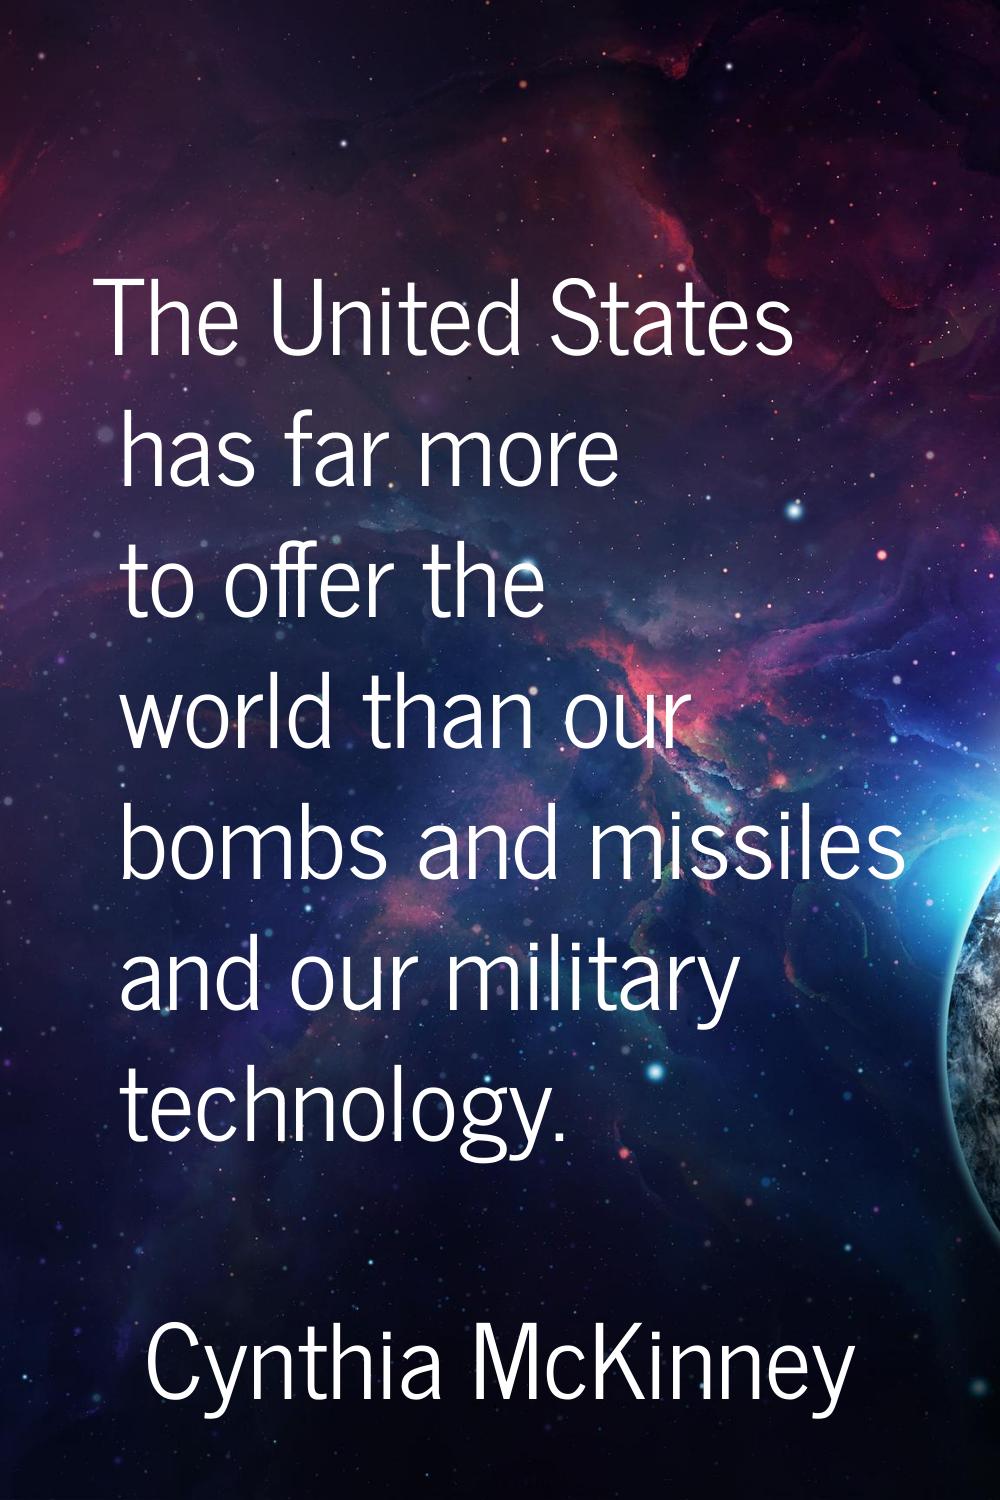 The United States has far more to offer the world than our bombs and missiles and our military tech